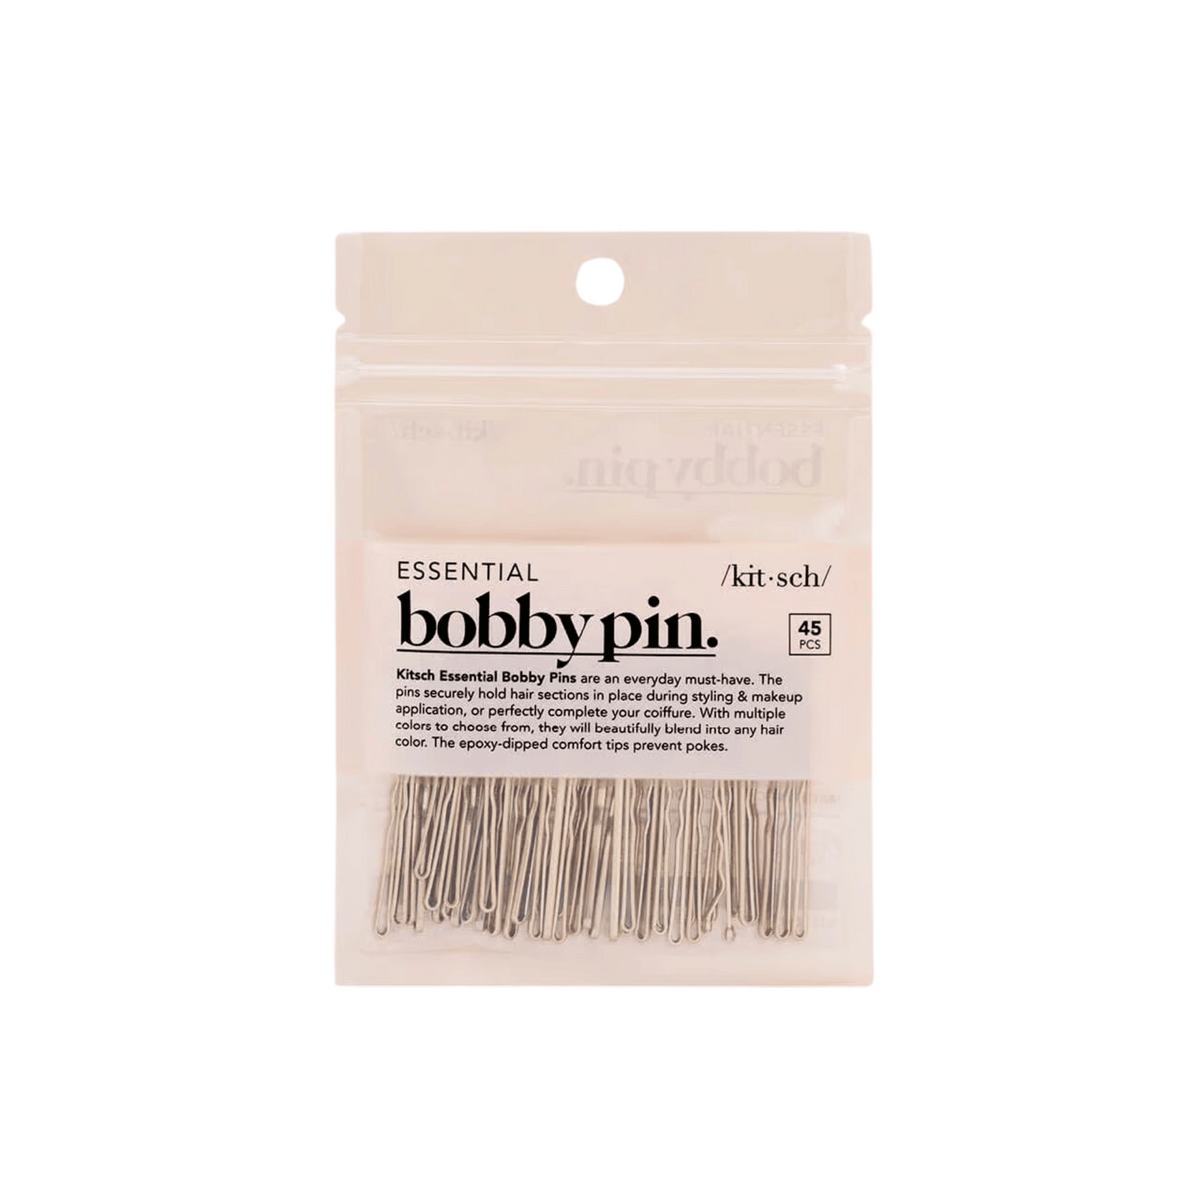 Primary Image of Blonde Bobby Pins